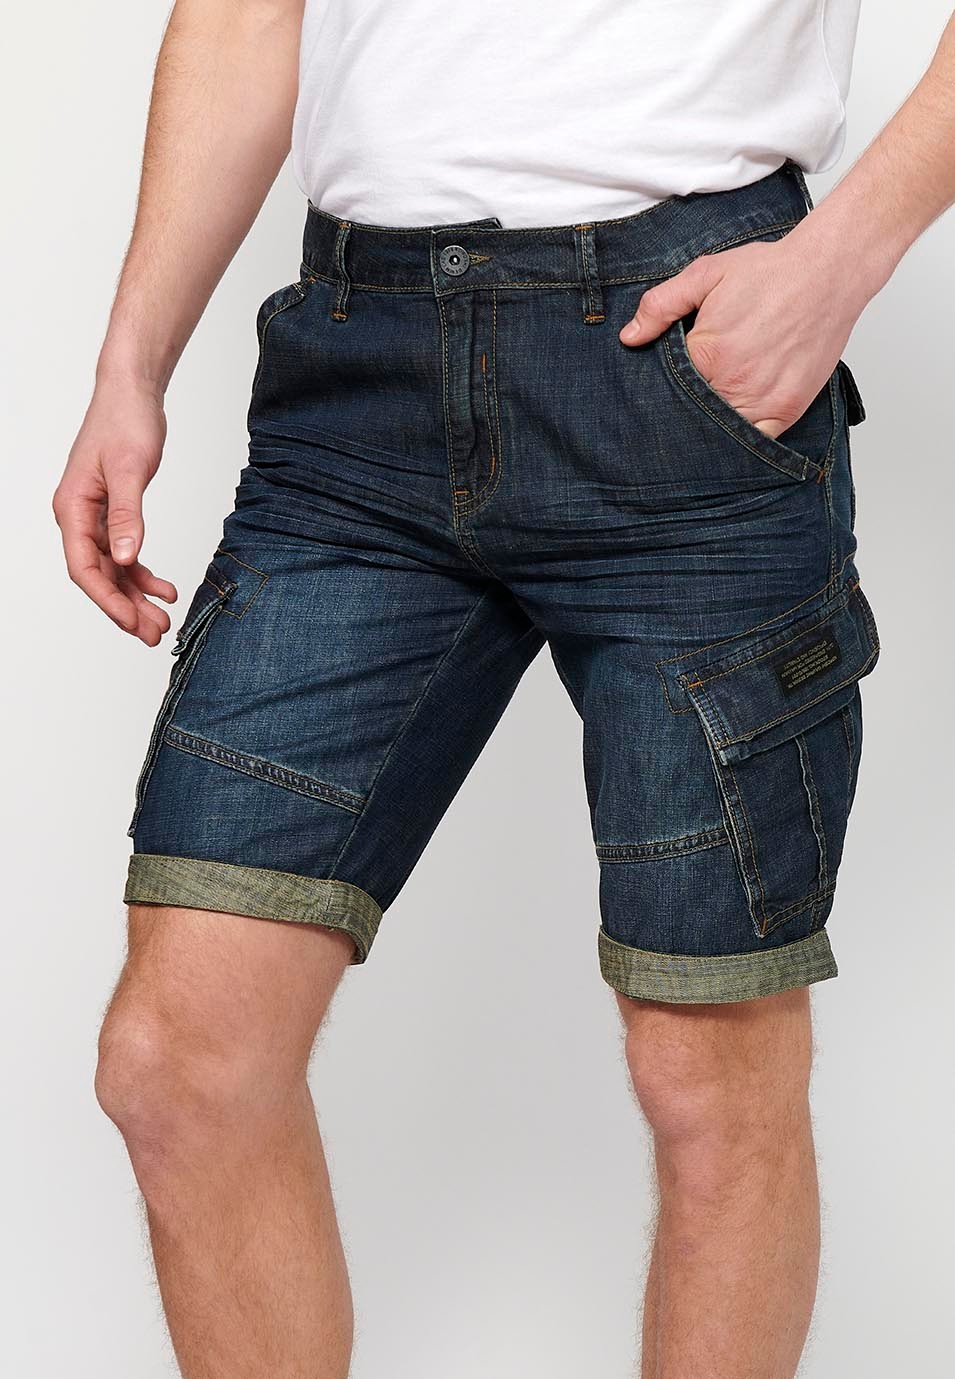 Blue Denim Bermuda Shorts with Side Cargo Pockets and Front Closure with Zipper and Button for Men 3